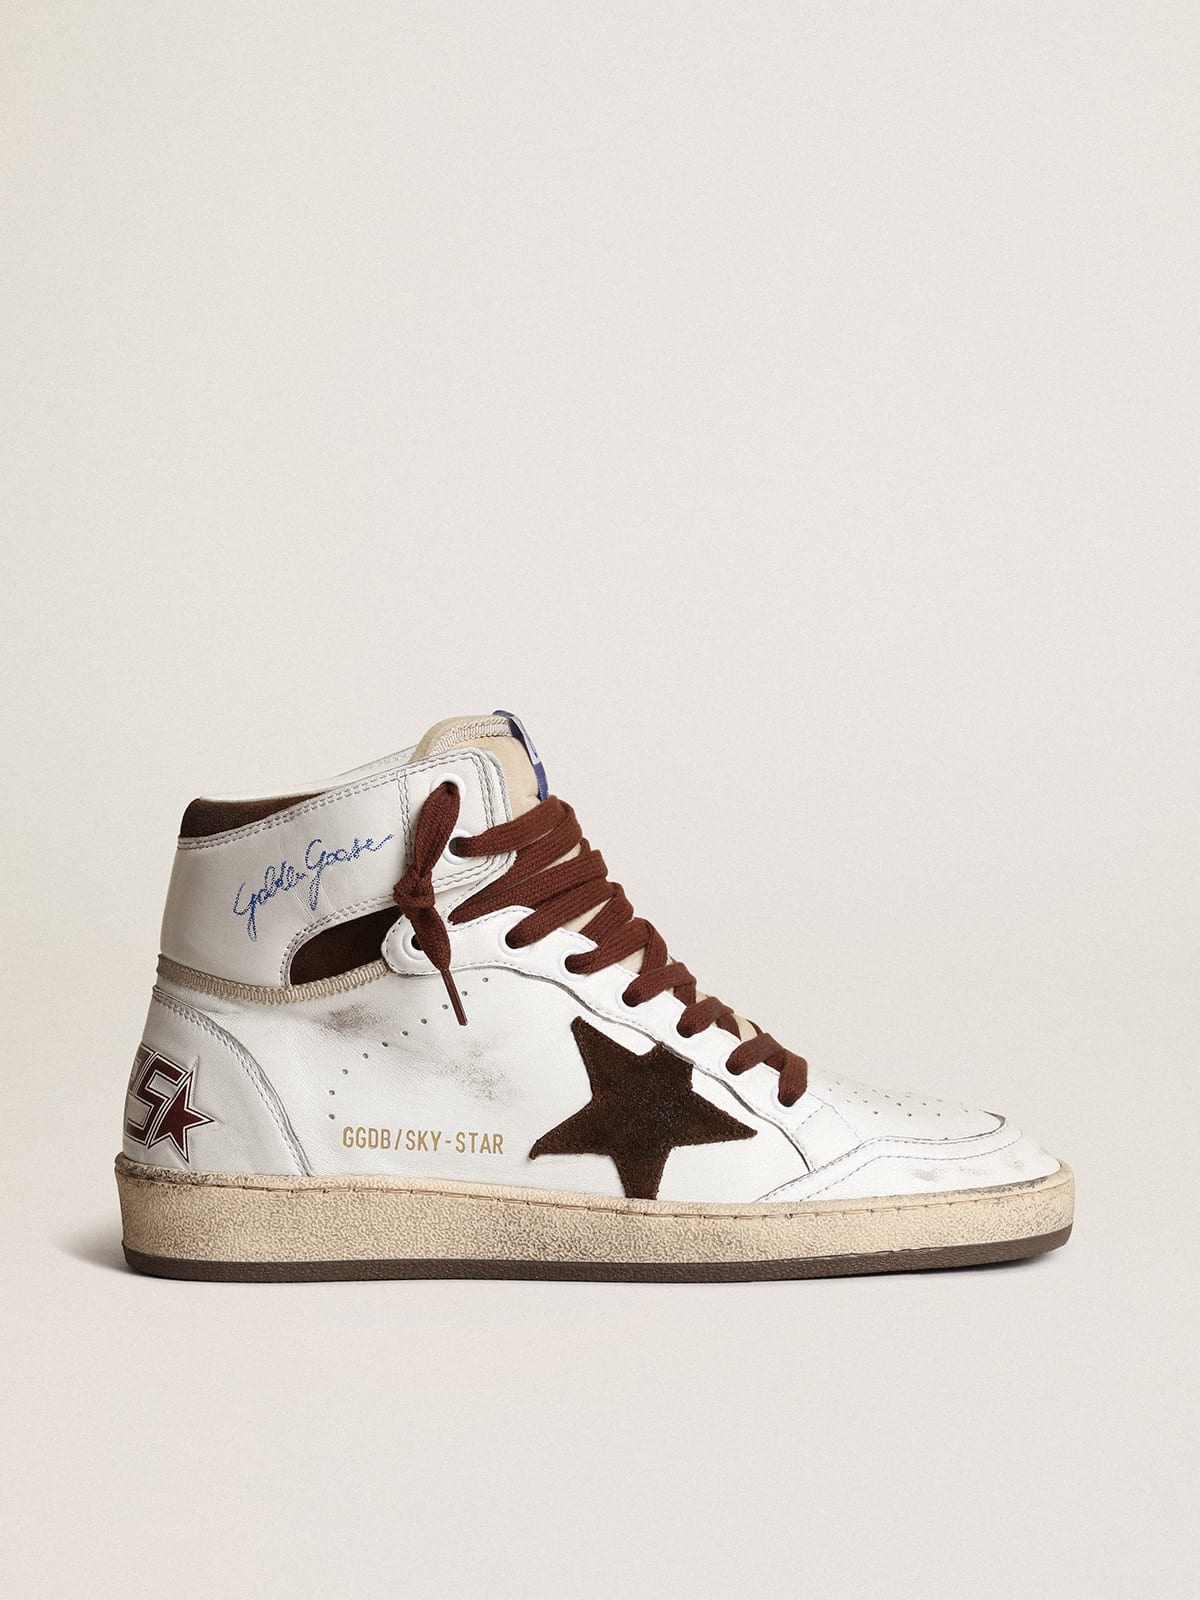 Golden Goose Women's Sky-Star in white nappa leather with